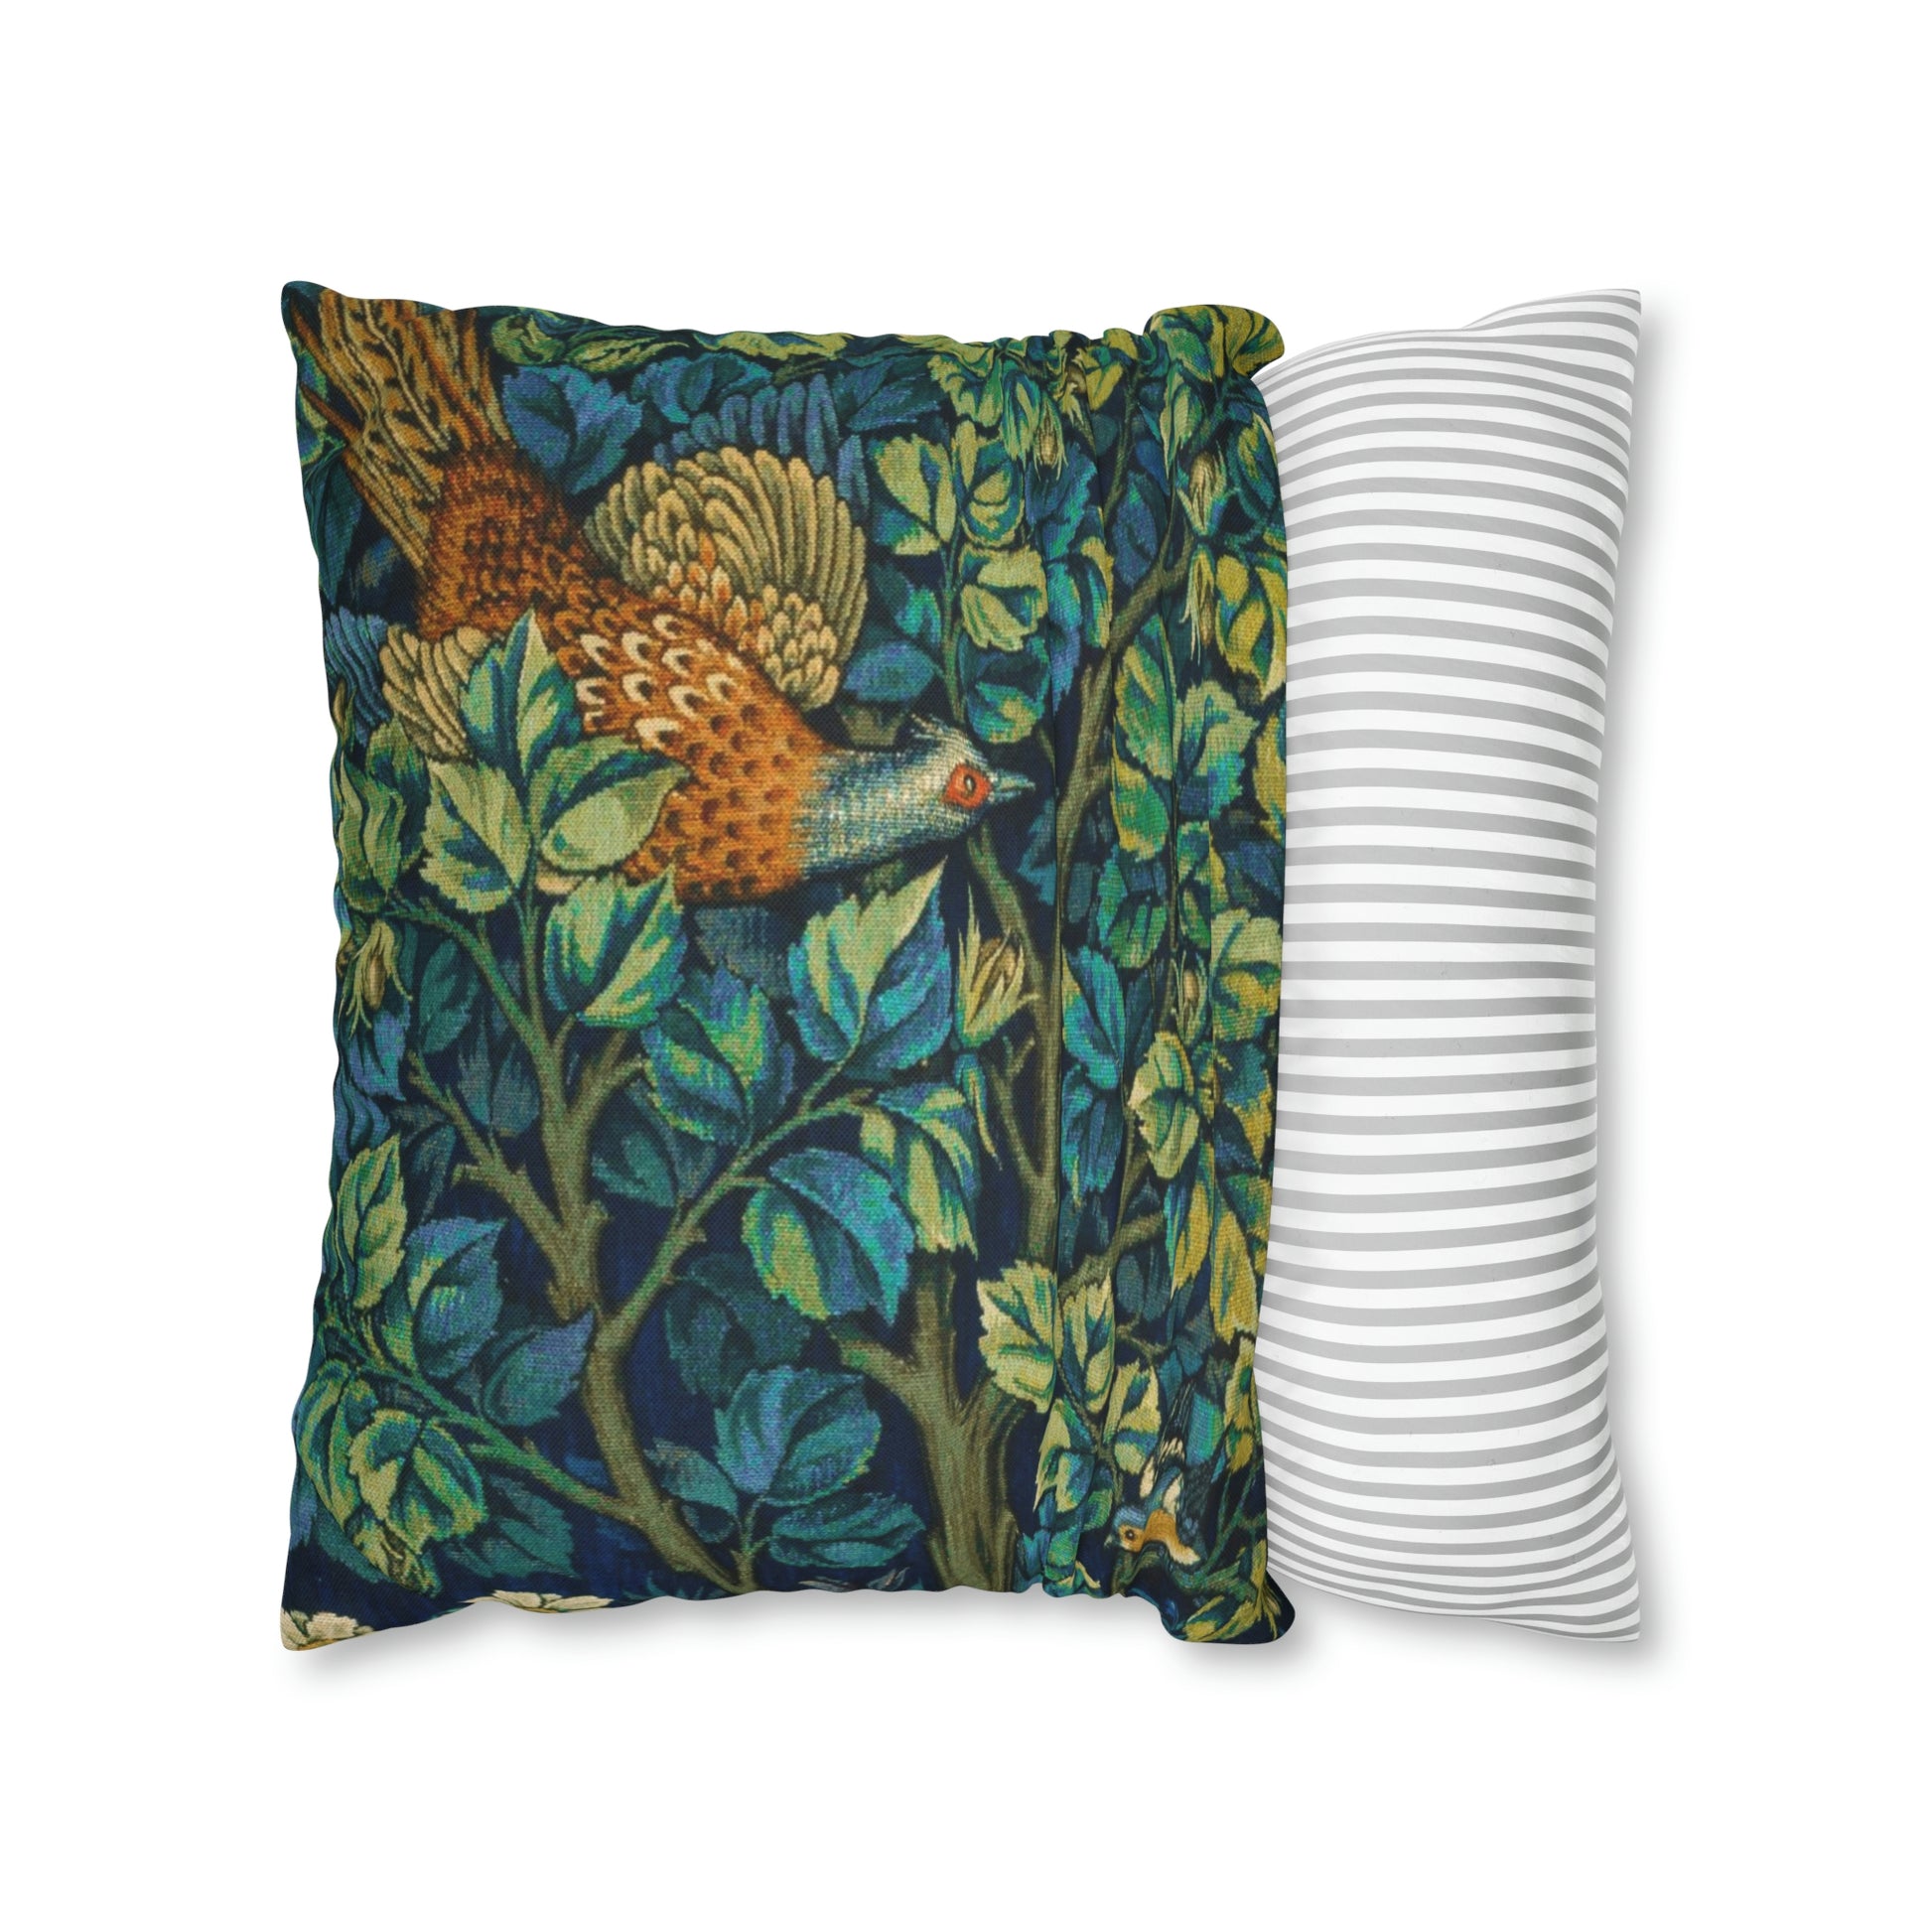 william-morris-co-cushion-cover-pheasant-and-squirrel-collection-pheasant-blue-23